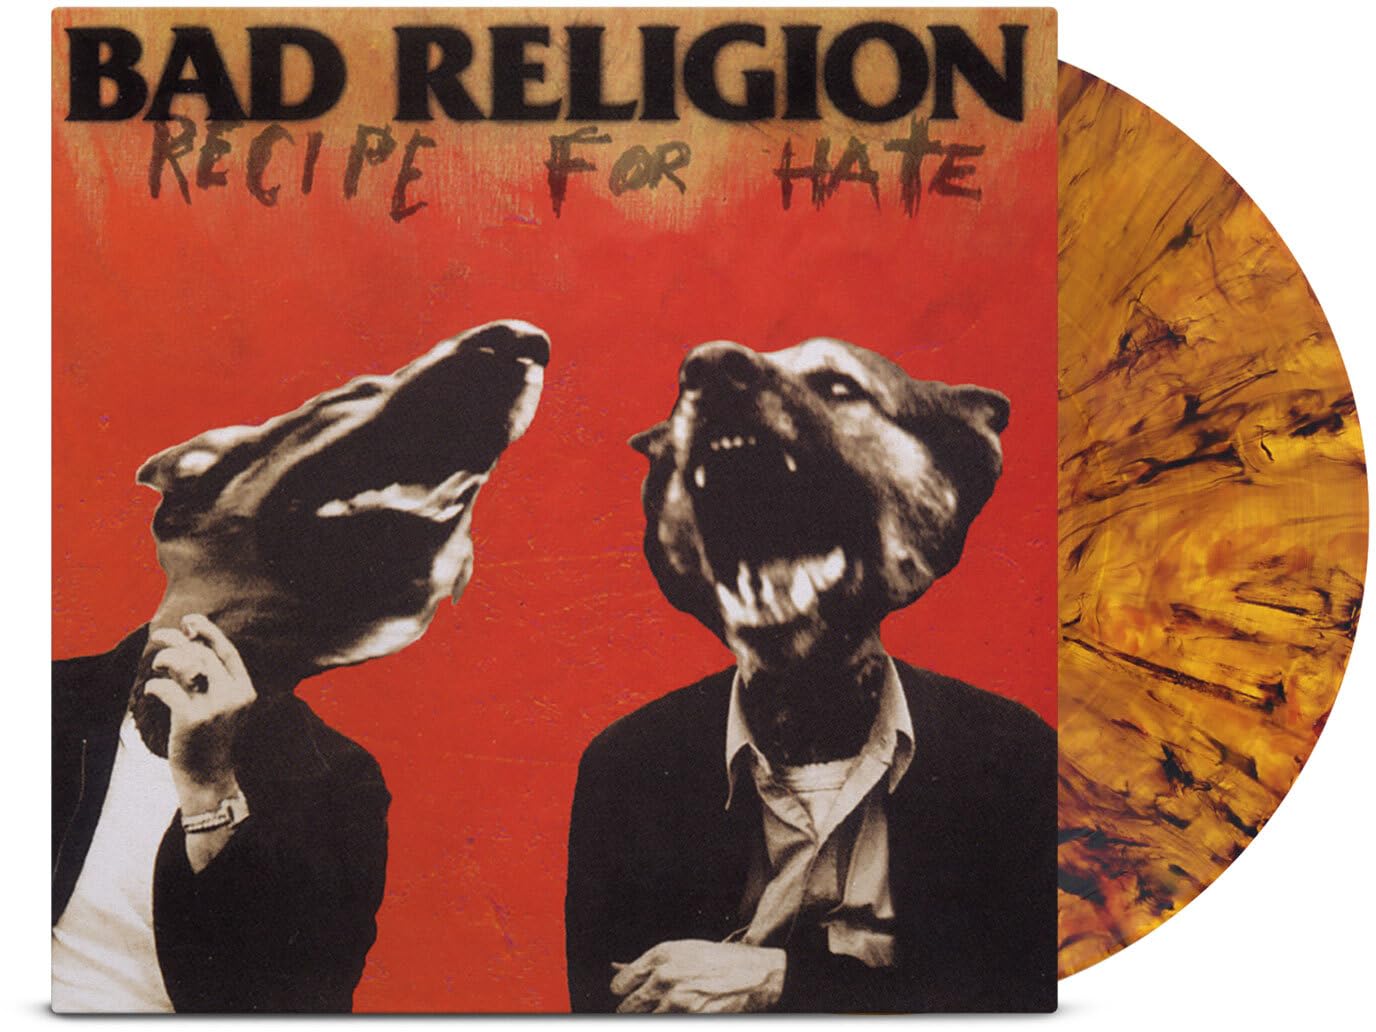 BAD RELIGION - RECIPE FOR HATE 30TH ANNIVERSARY EDITION LIMITED (TIGERS EYE) LP